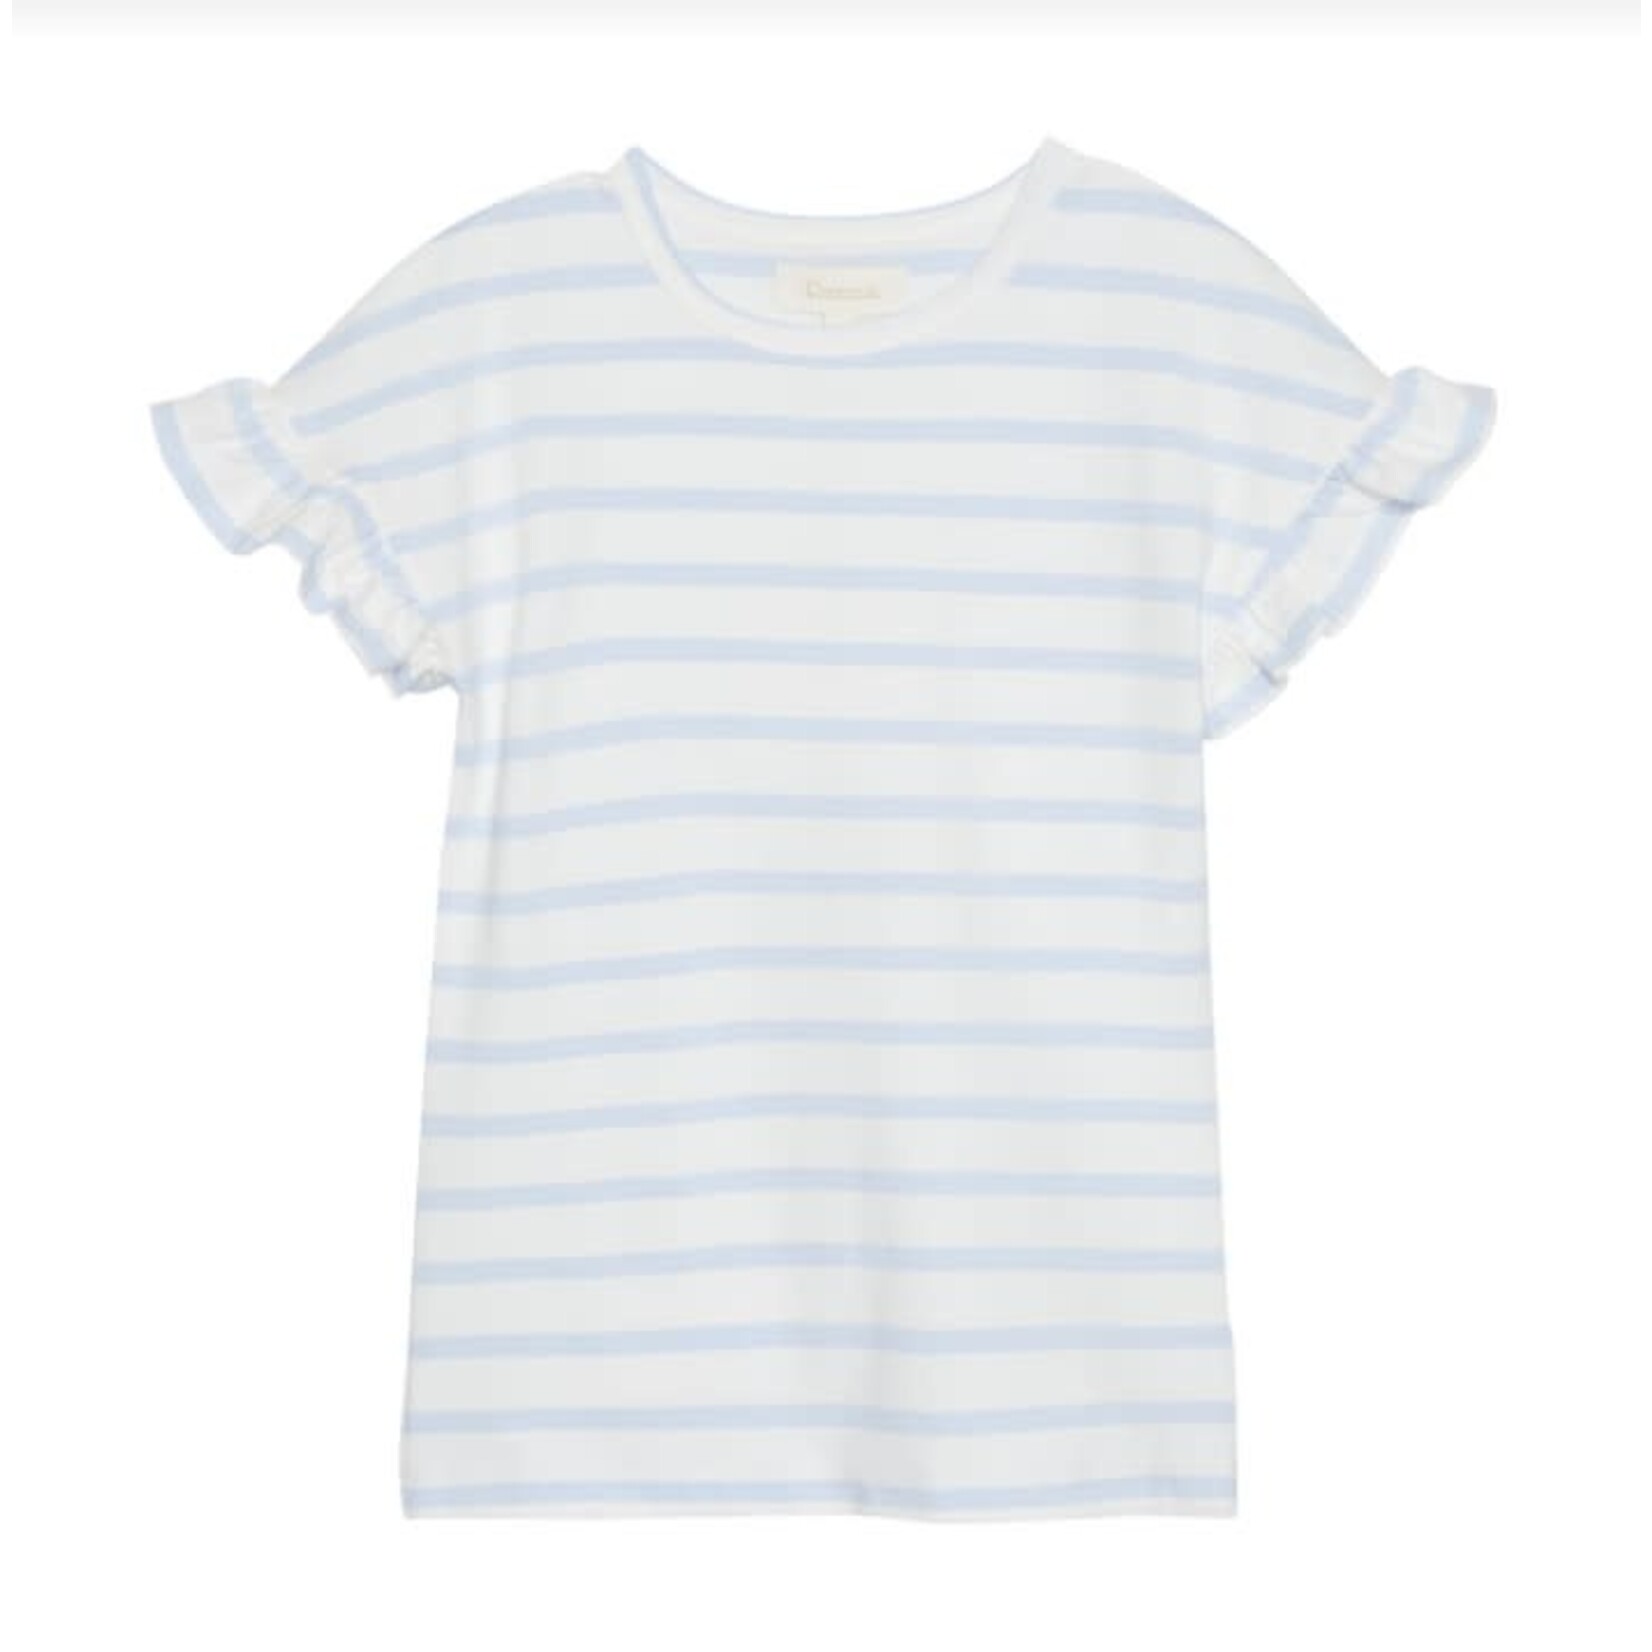 Creamie CREAMIE - T-shirt with shoulder ruffle and blue stripes